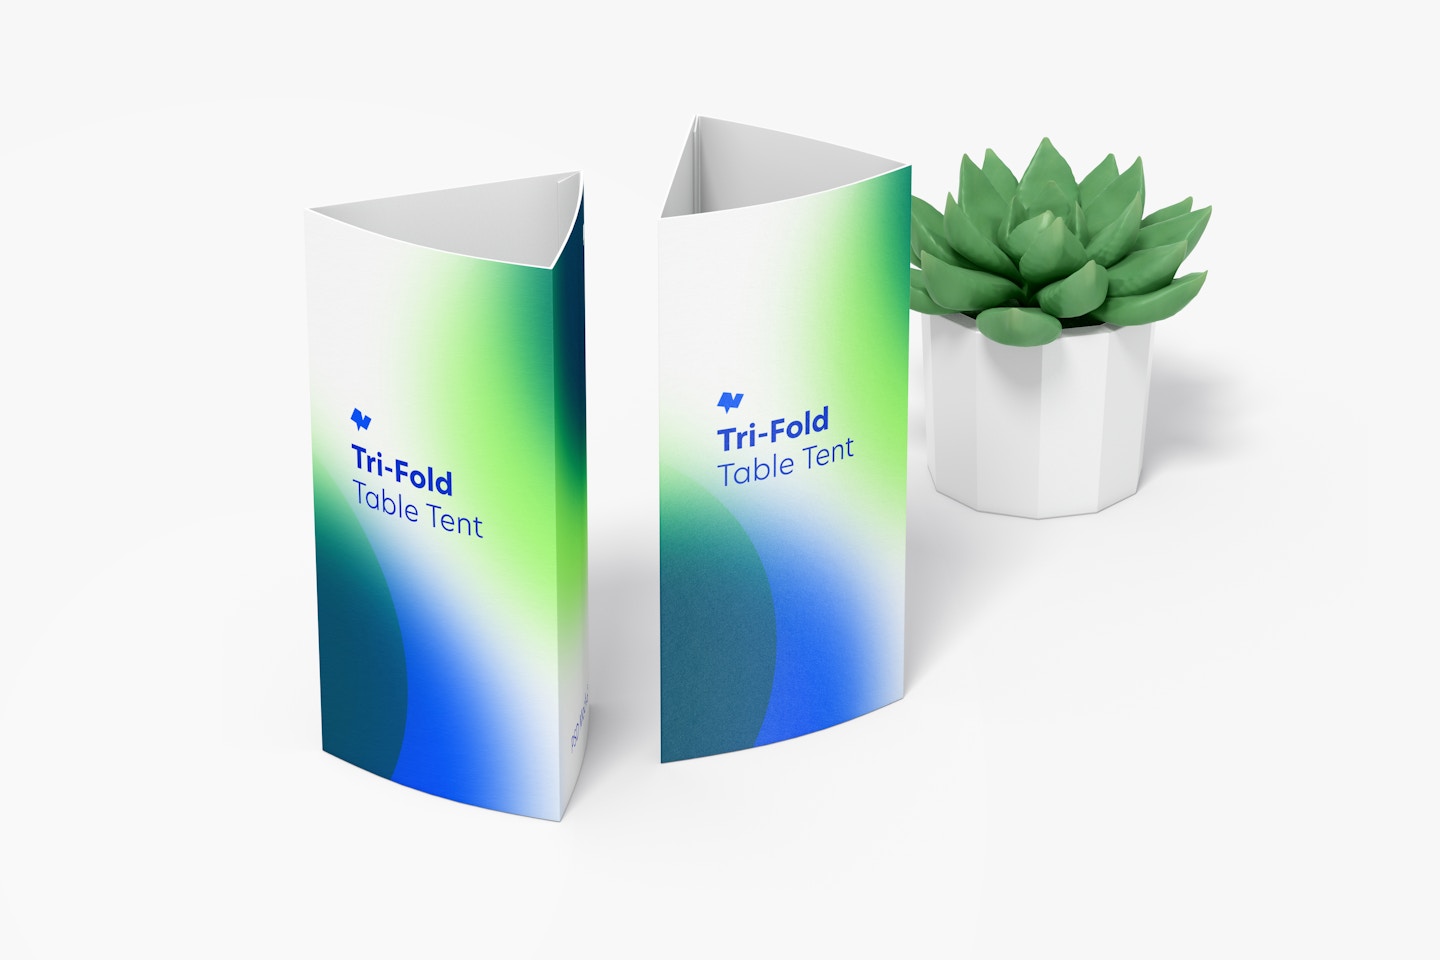 Tri-Fold Table Tents with Pot Plant Mockup